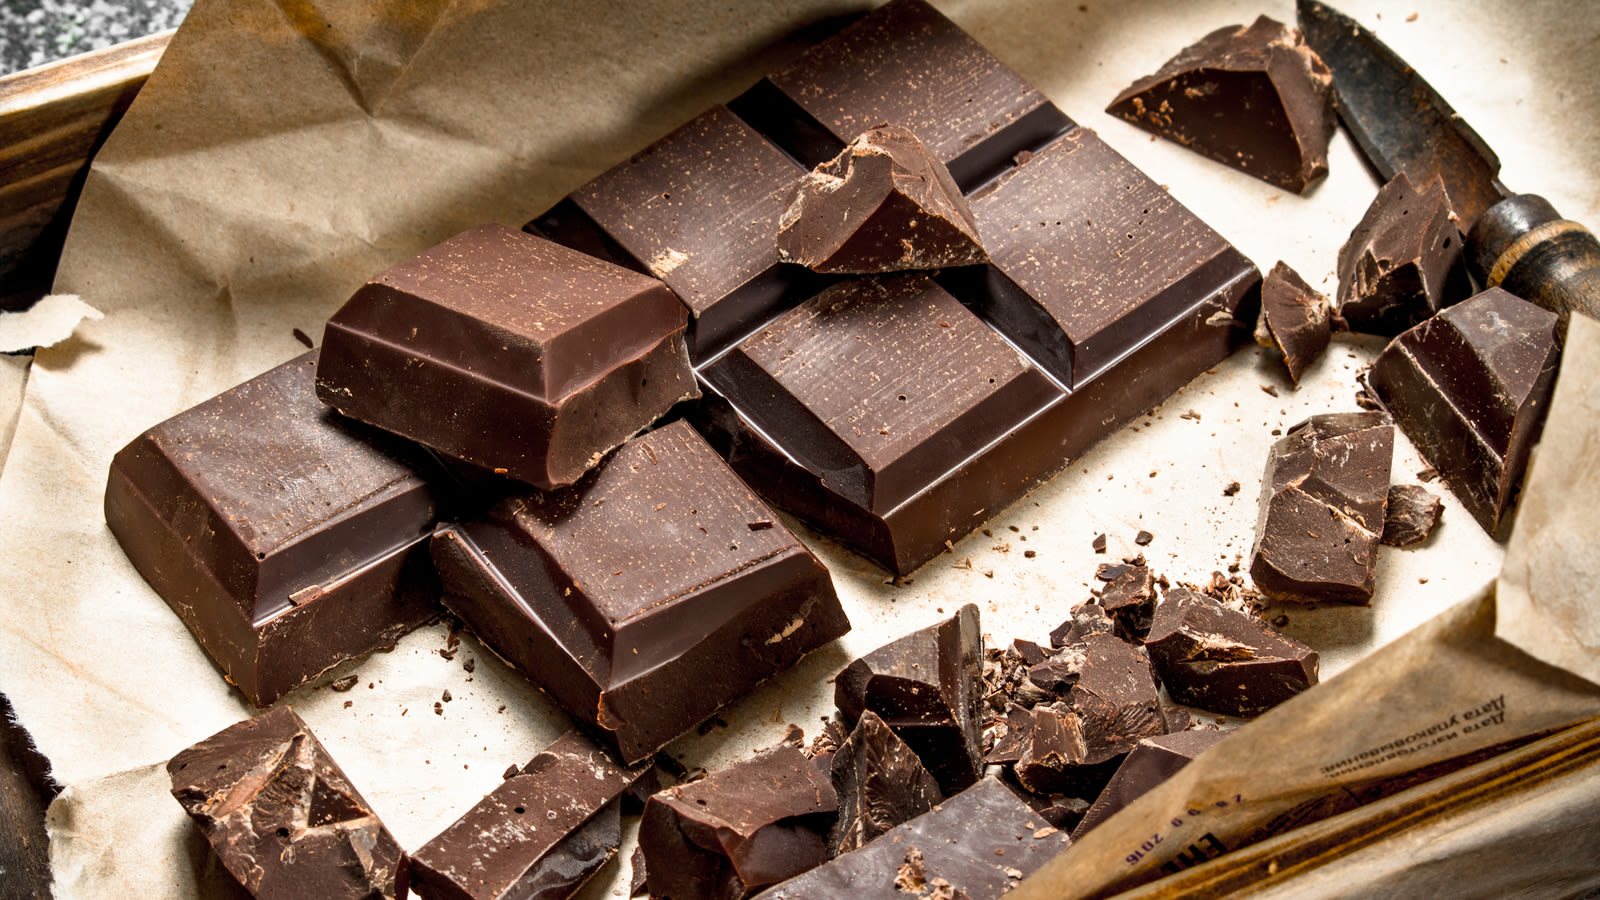 Heavy metals found in some dark chocolate, not 'cause for alarm': Experts